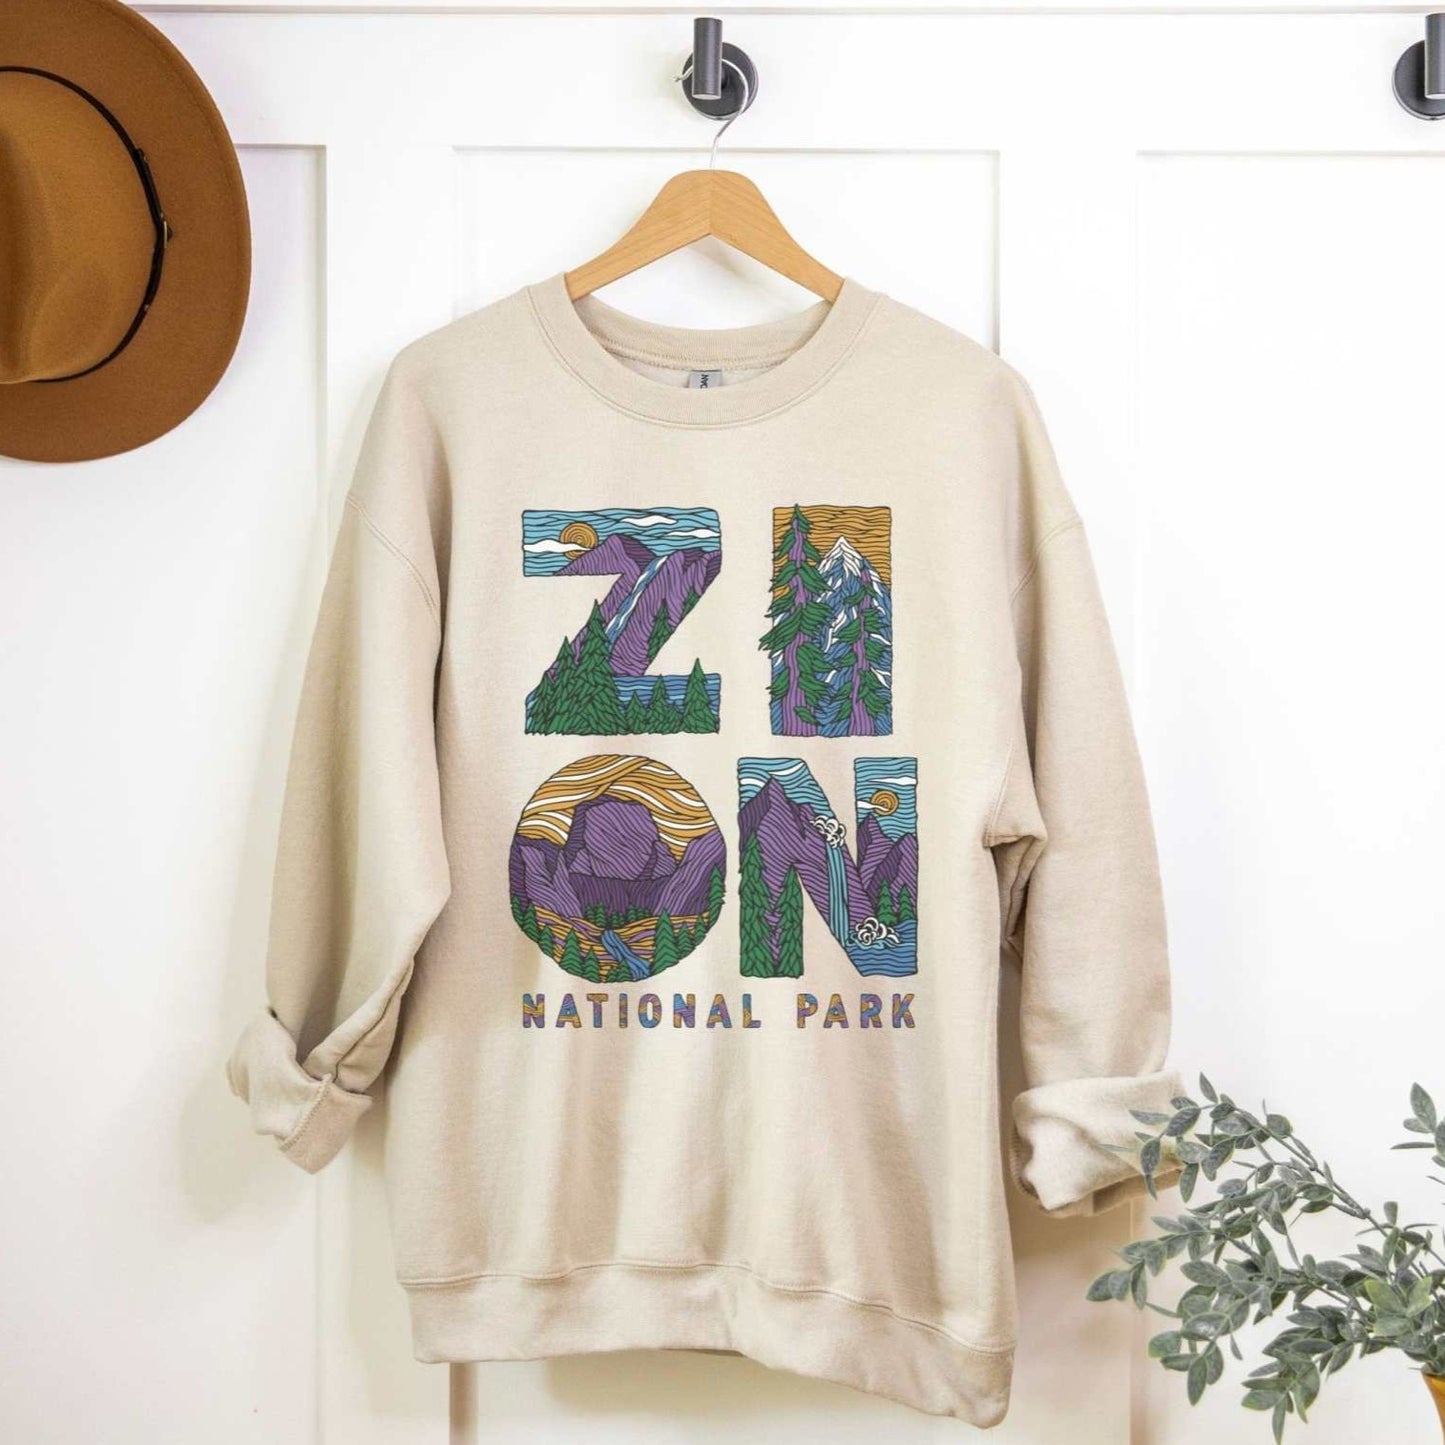 Zion Letters National Park SweatshirtBring back the vibe on your next outdoor outing with this adventure filled Zion National Park Sweatshirt.
- cotton blend - medium weight - unisex sizing
 
The Lincol